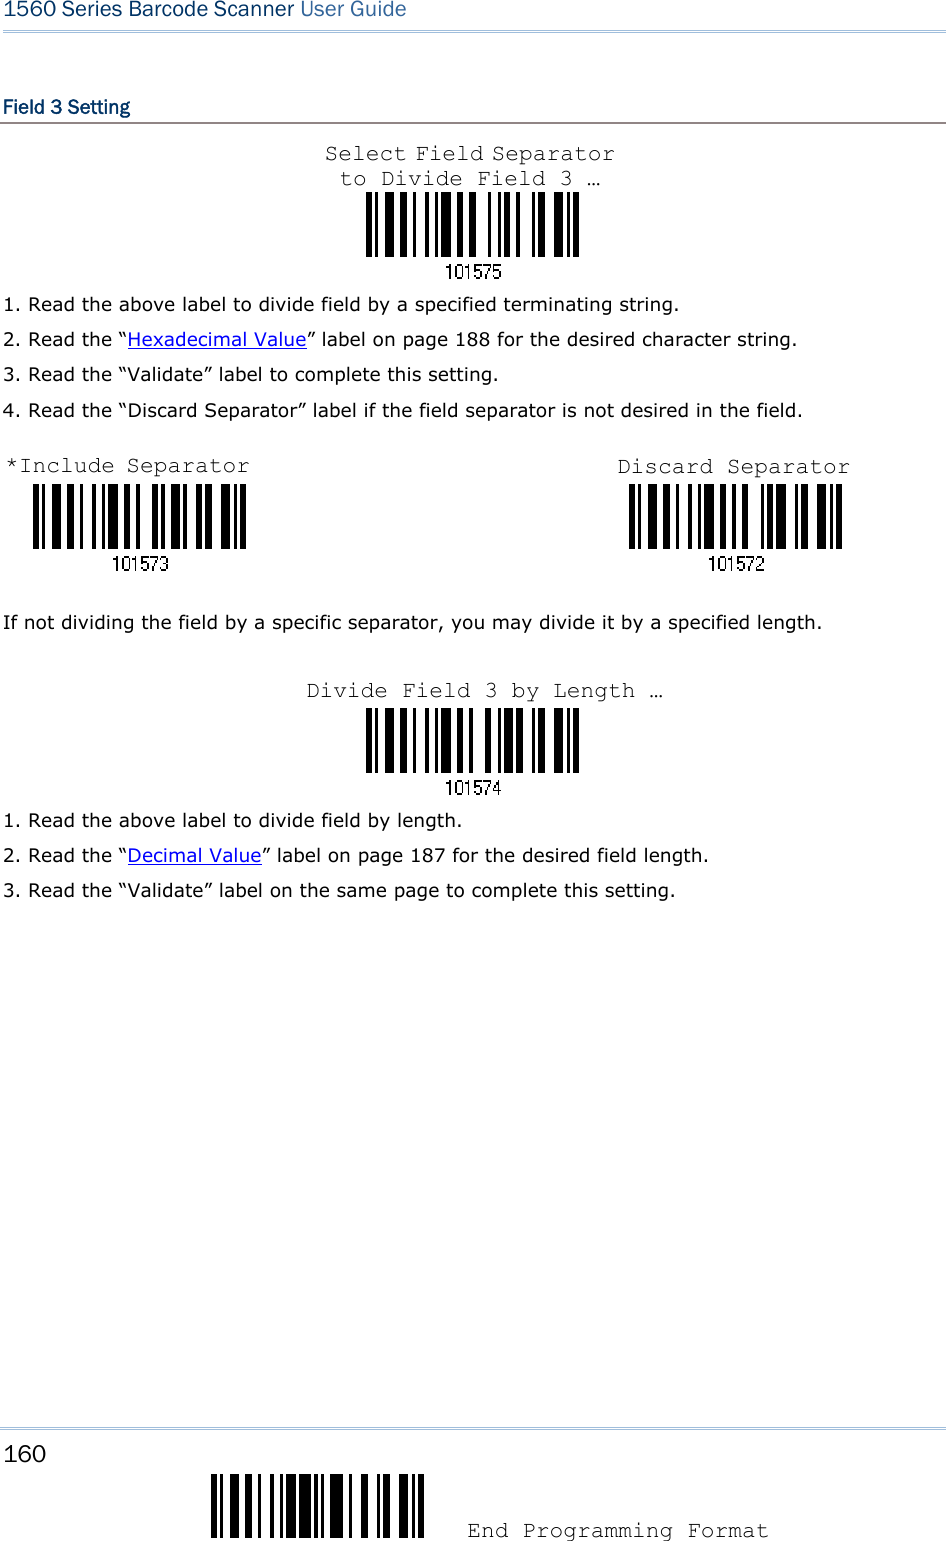 160  End Programming Format 1560 Series Barcode Scanner User Guide  Field 3 Setting    1. Read the above label to divide field by a specified terminating string. 2. Read the “Hexadecimal Value” label on page 188 for the desired character string.   3. Read the “Validate” label to complete this setting. 4. Read the “Discard Separator” label if the field separator is not desired in the field.                                 If not dividing the field by a specific separator, you may divide it by a specified length.    1. Read the above label to divide field by length. 2. Read the “Decimal Value” label on page 187 for the desired field length. 3. Read the “Validate” label on the same page to complete this setting.                   Select Field Separator to Divide Field 3 … *Include Separator Discard Separator Divide Field 3 by Length …